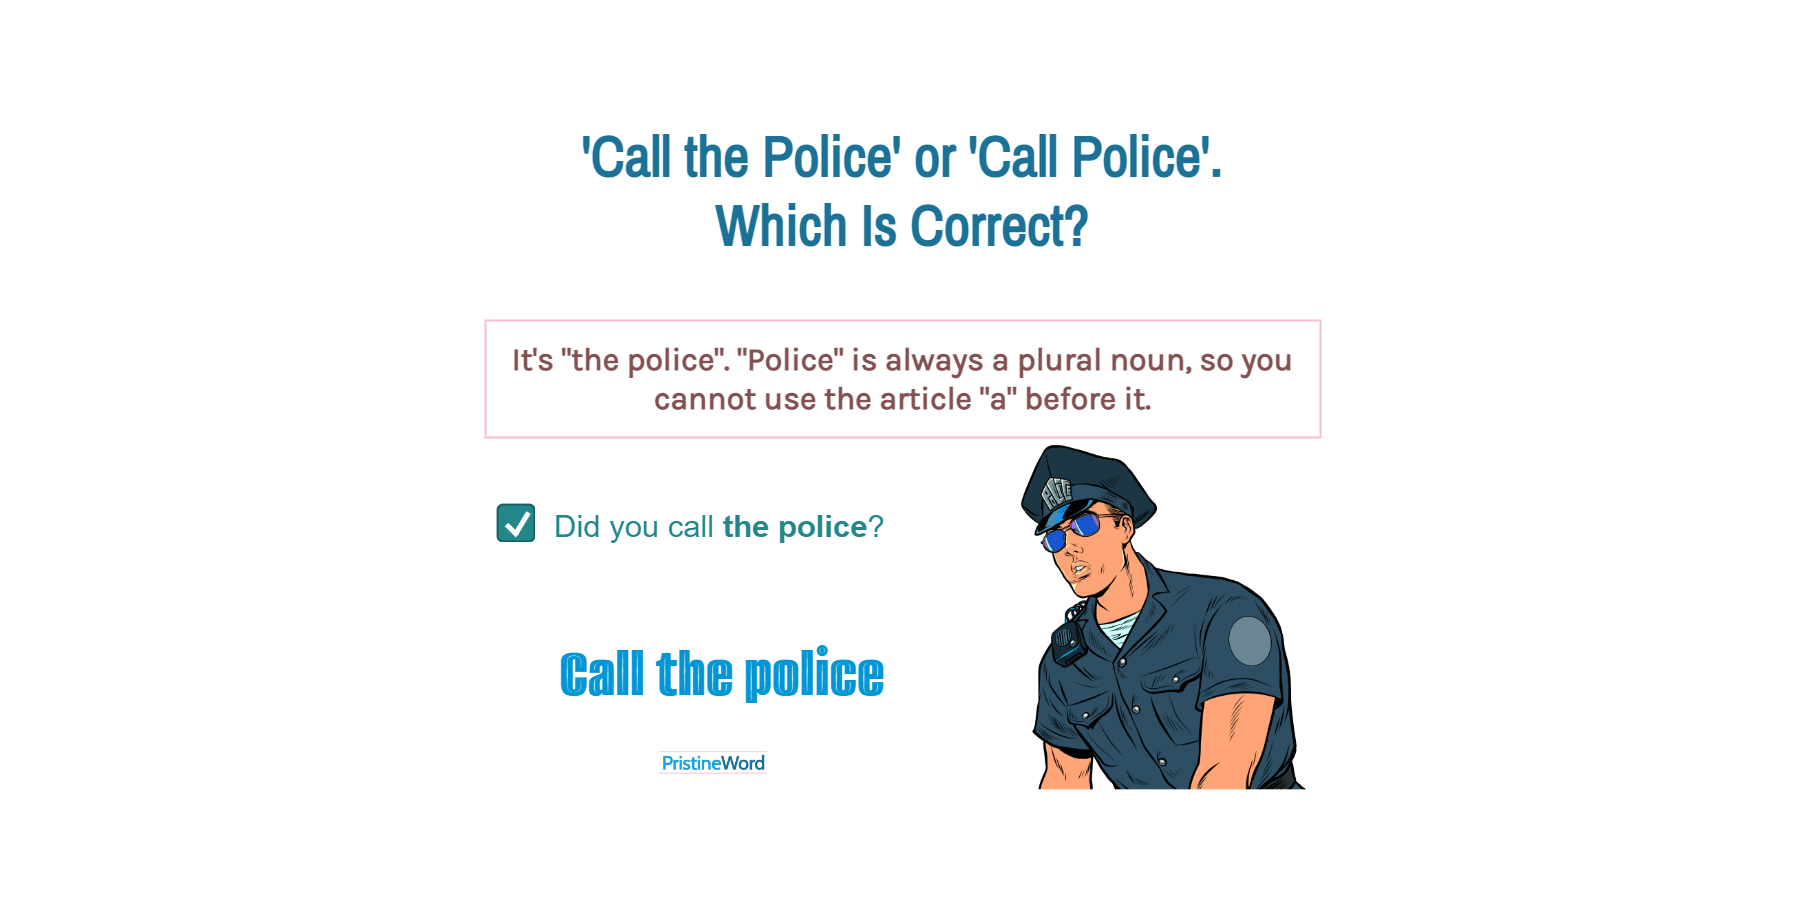 Is It 'The Police' or 'A Police'?